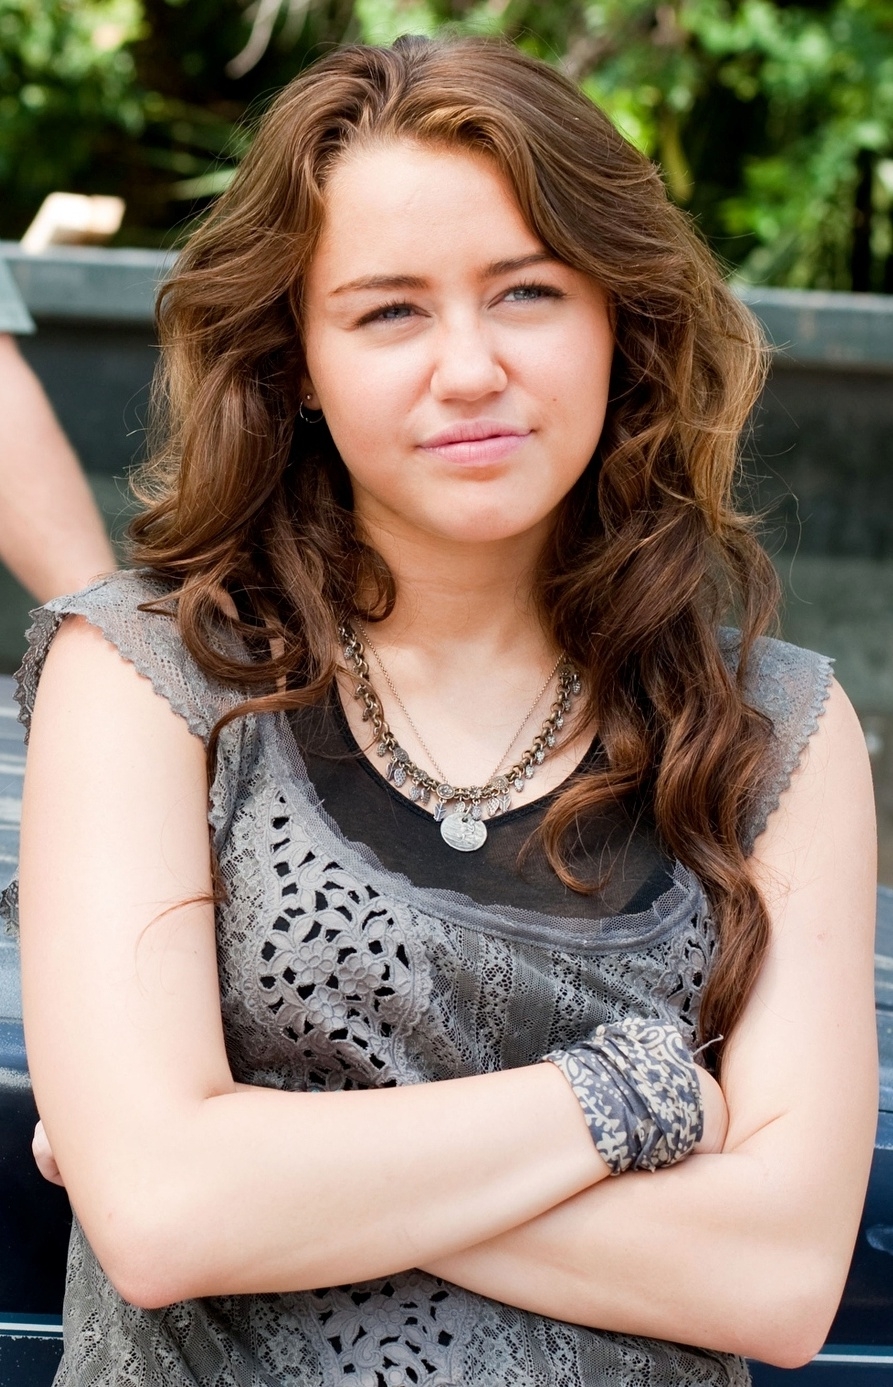 Miley Cyrus - The last song - TV Female Characters Photo (31108048 ...